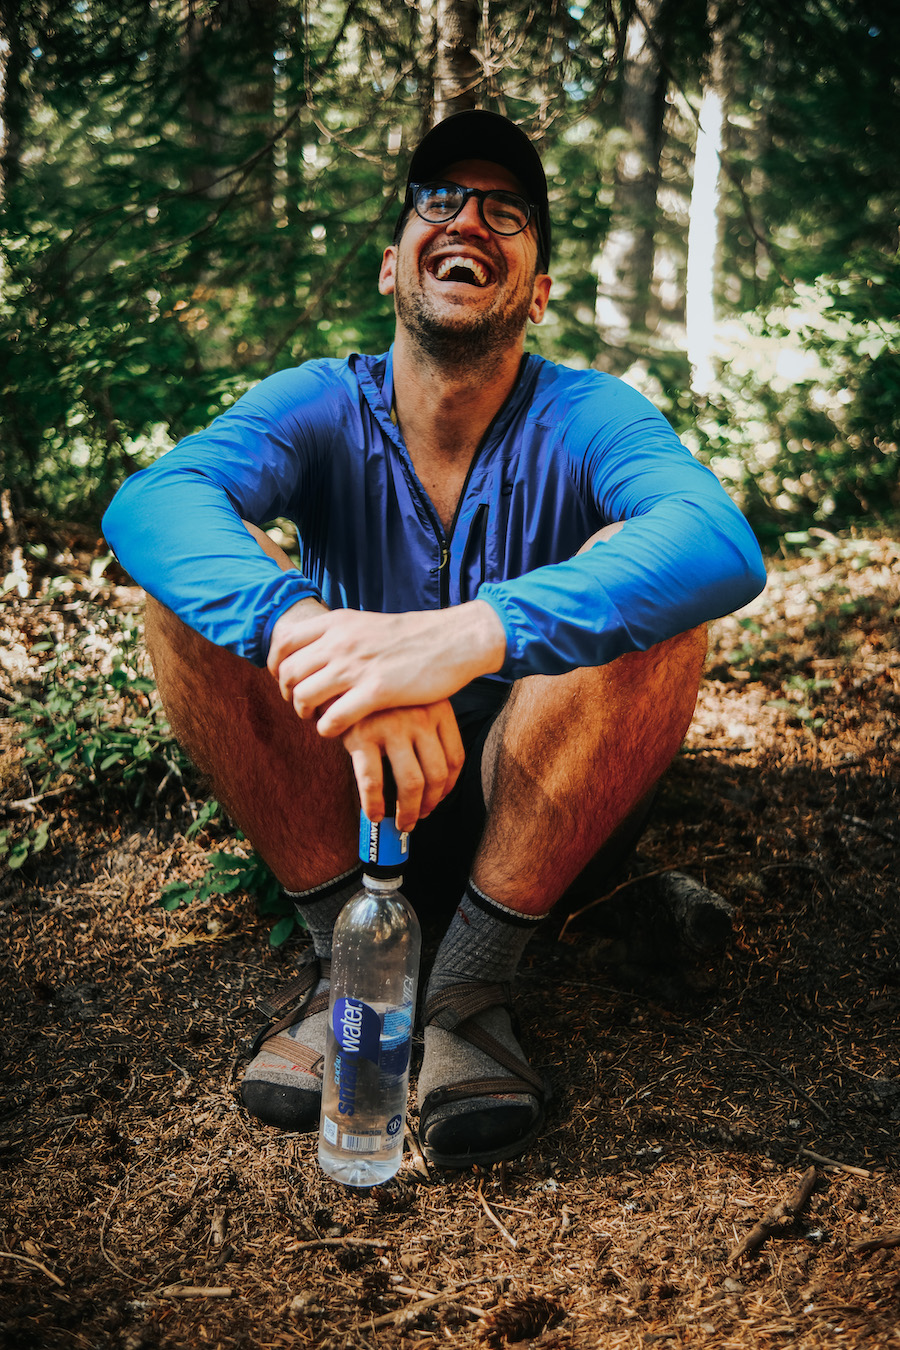 a hiker sitting on the ground laughing while filtering water into his water bottle